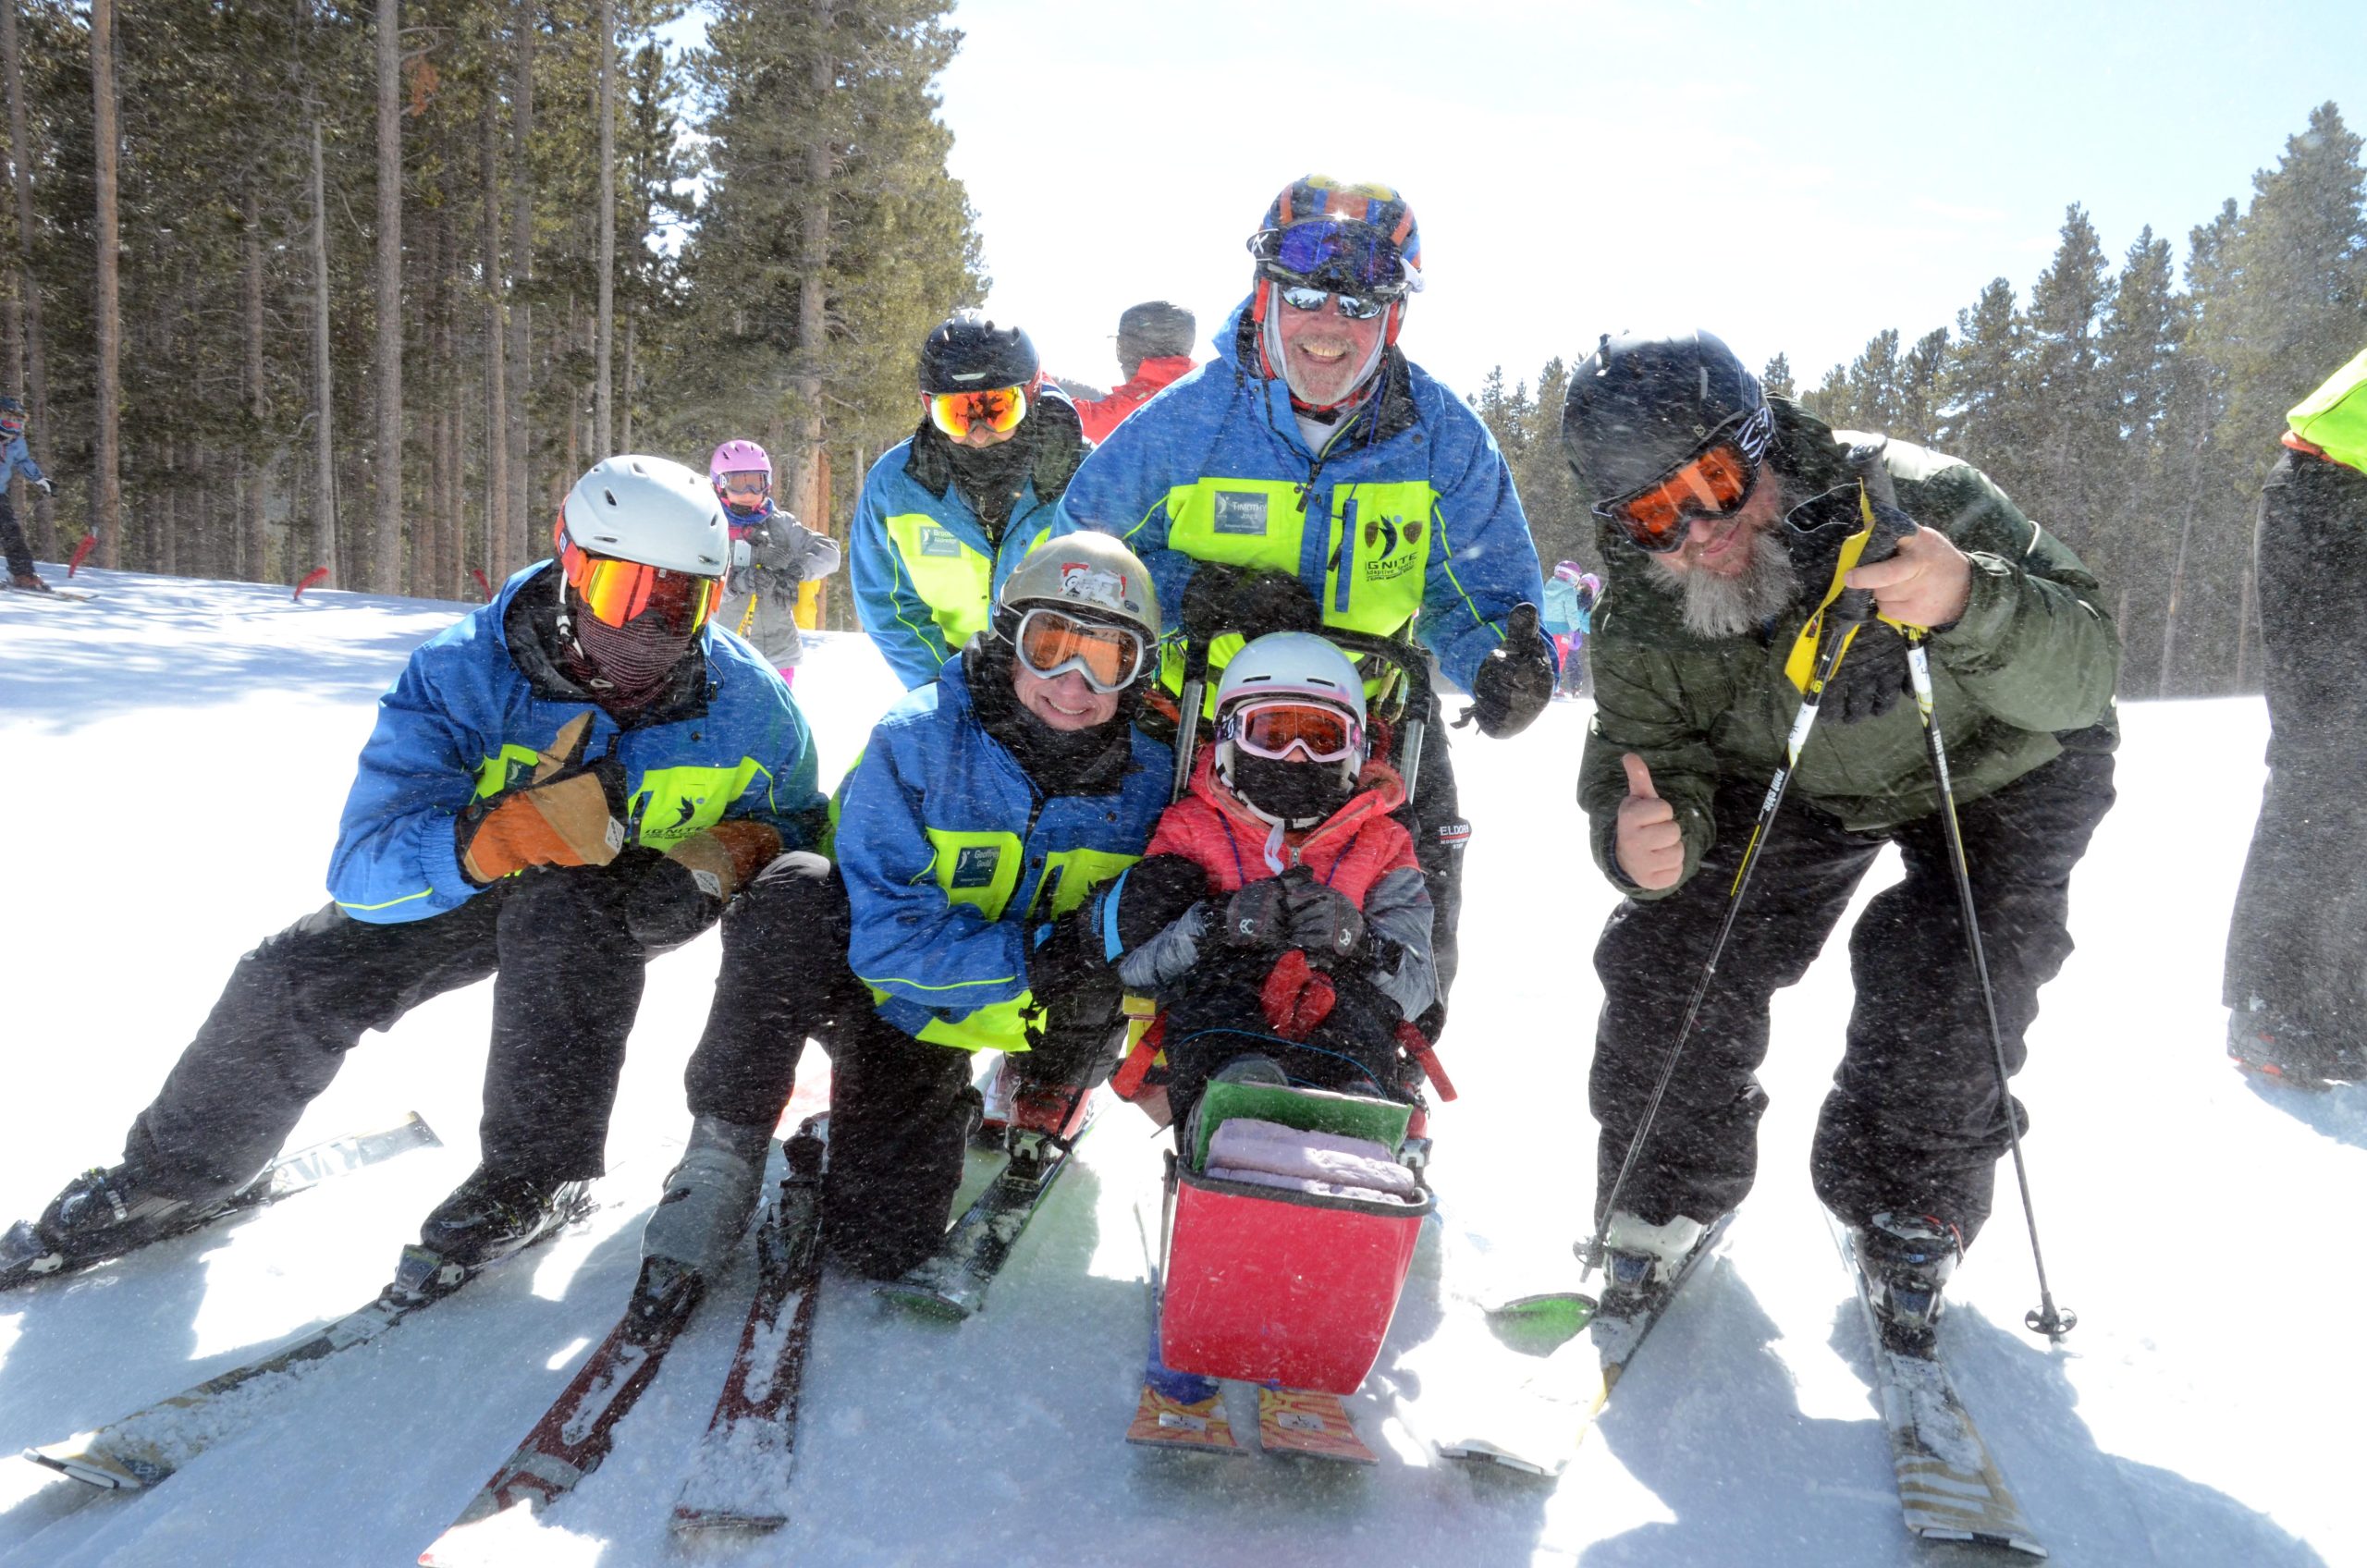 A group of volunteers and athletes smiling on a sunny Eldora day.